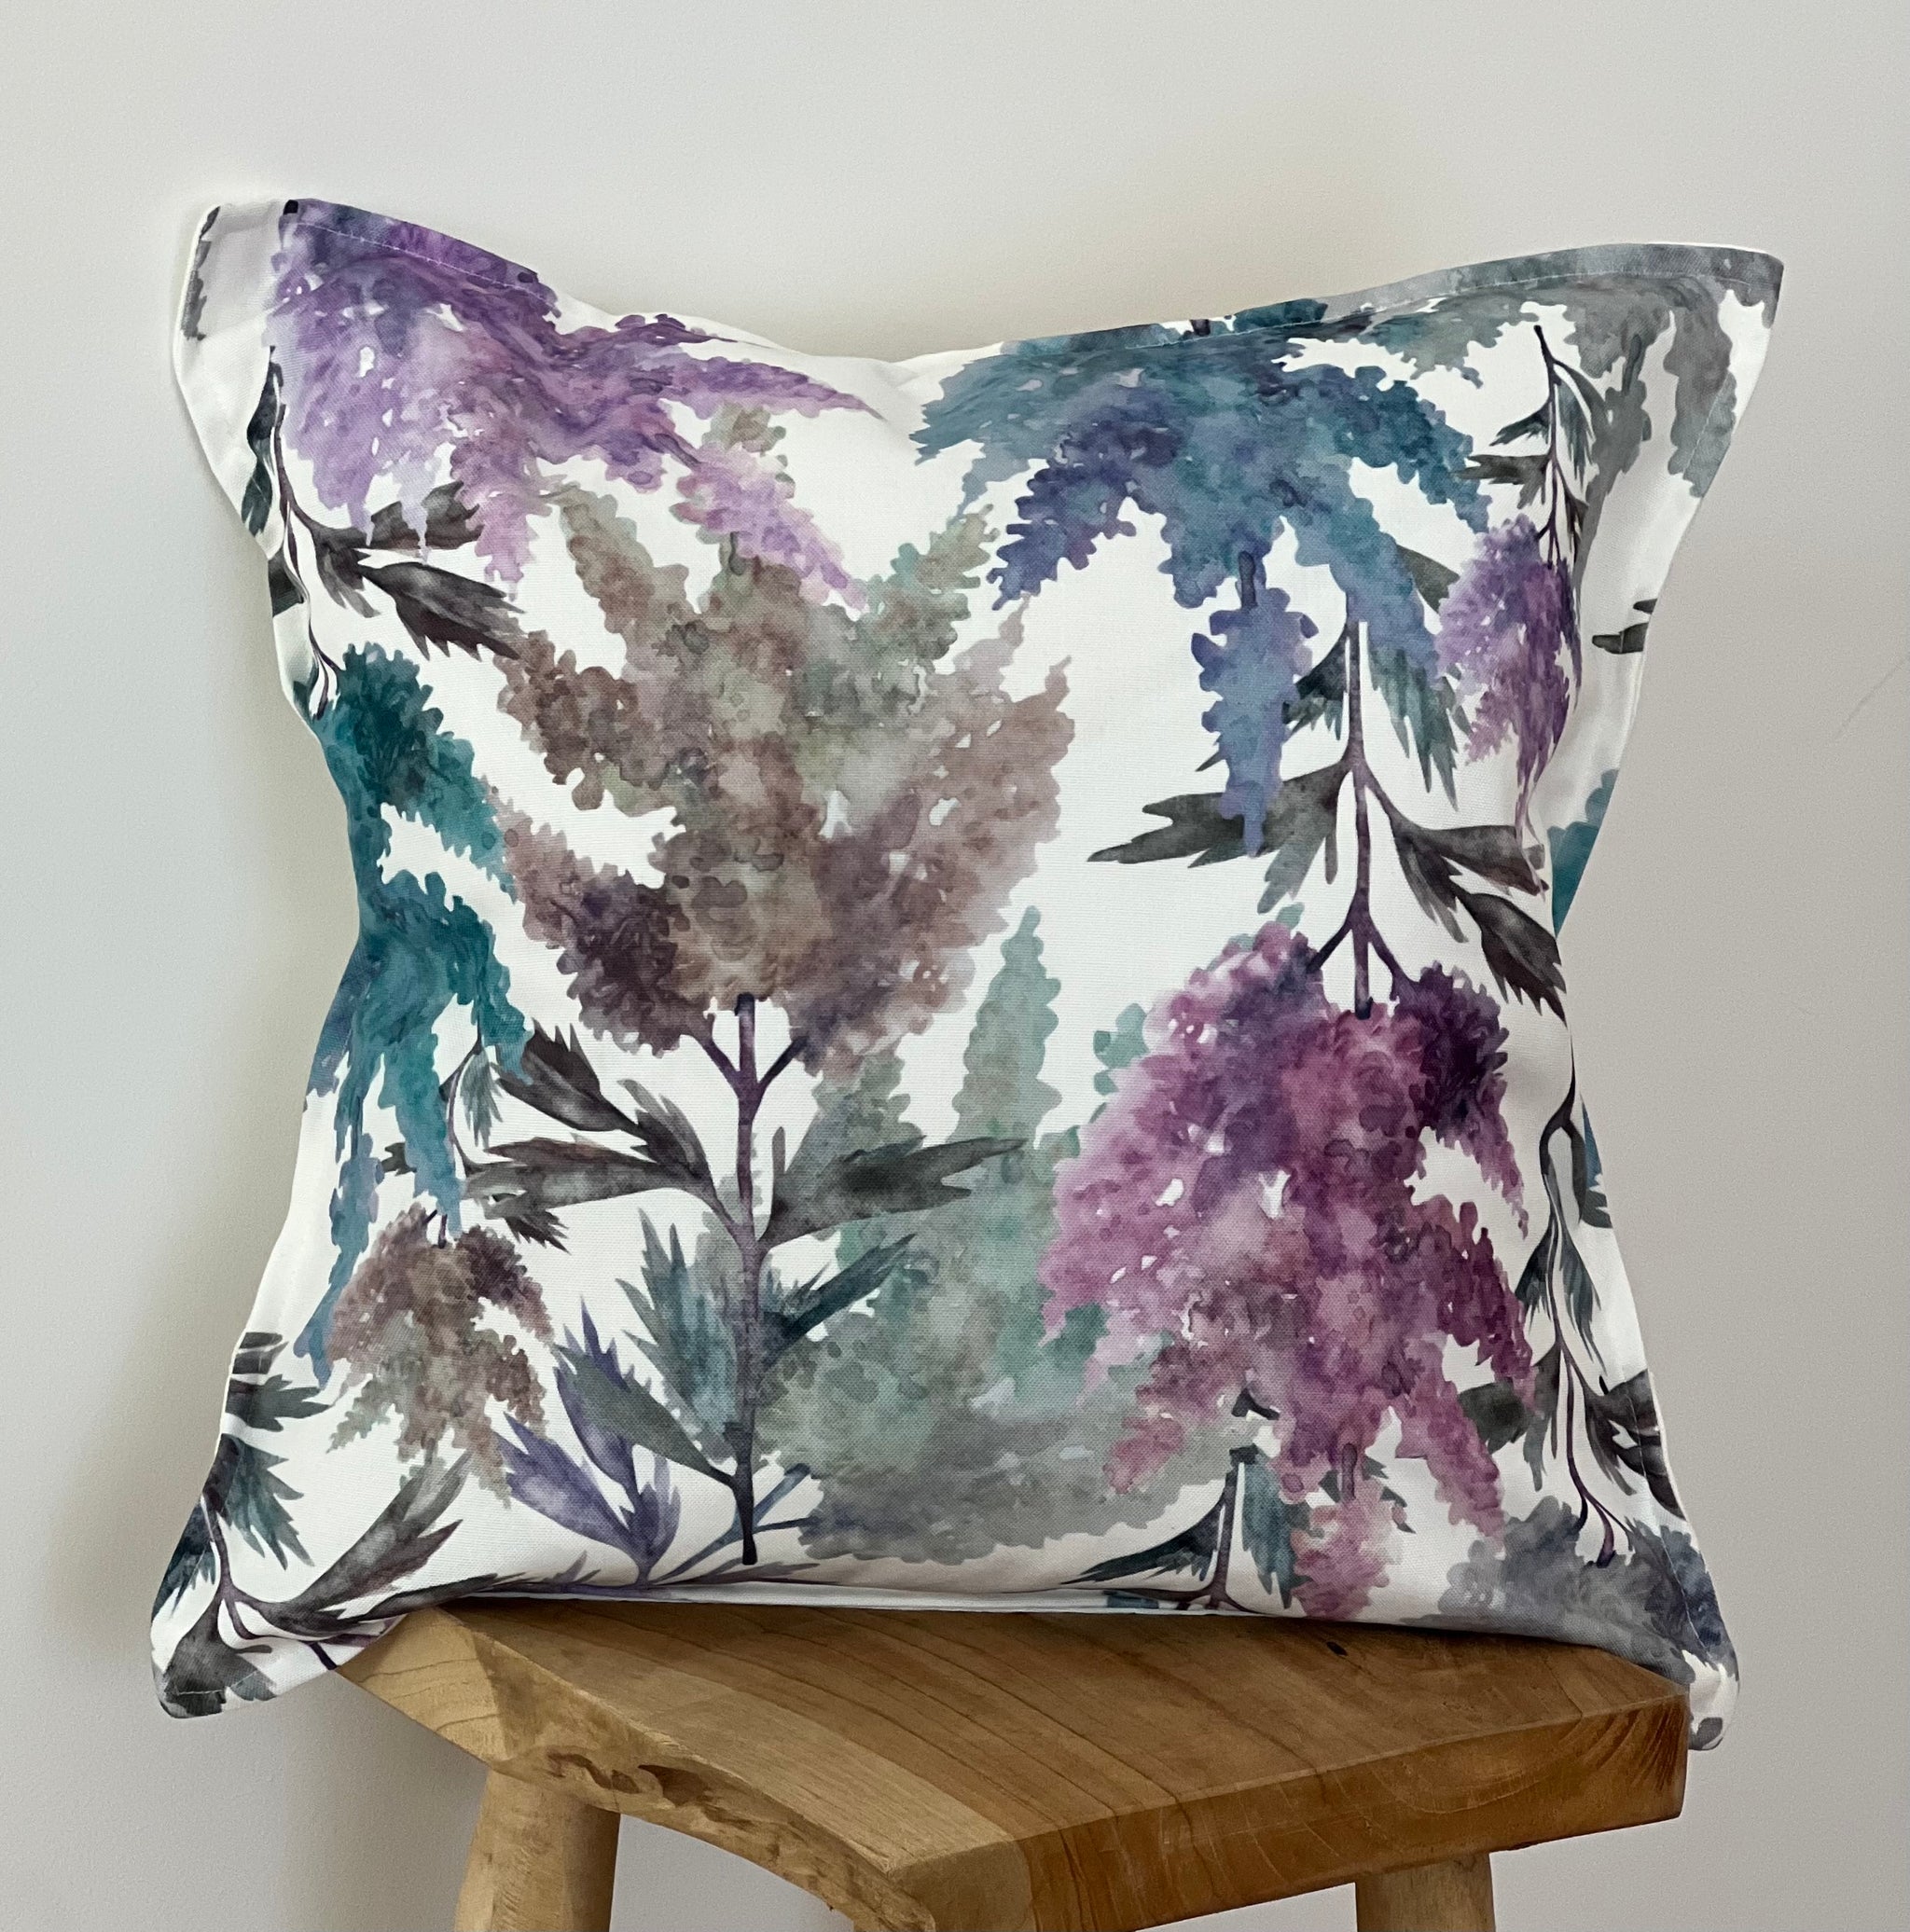 Blooms 5 Cushion Cover